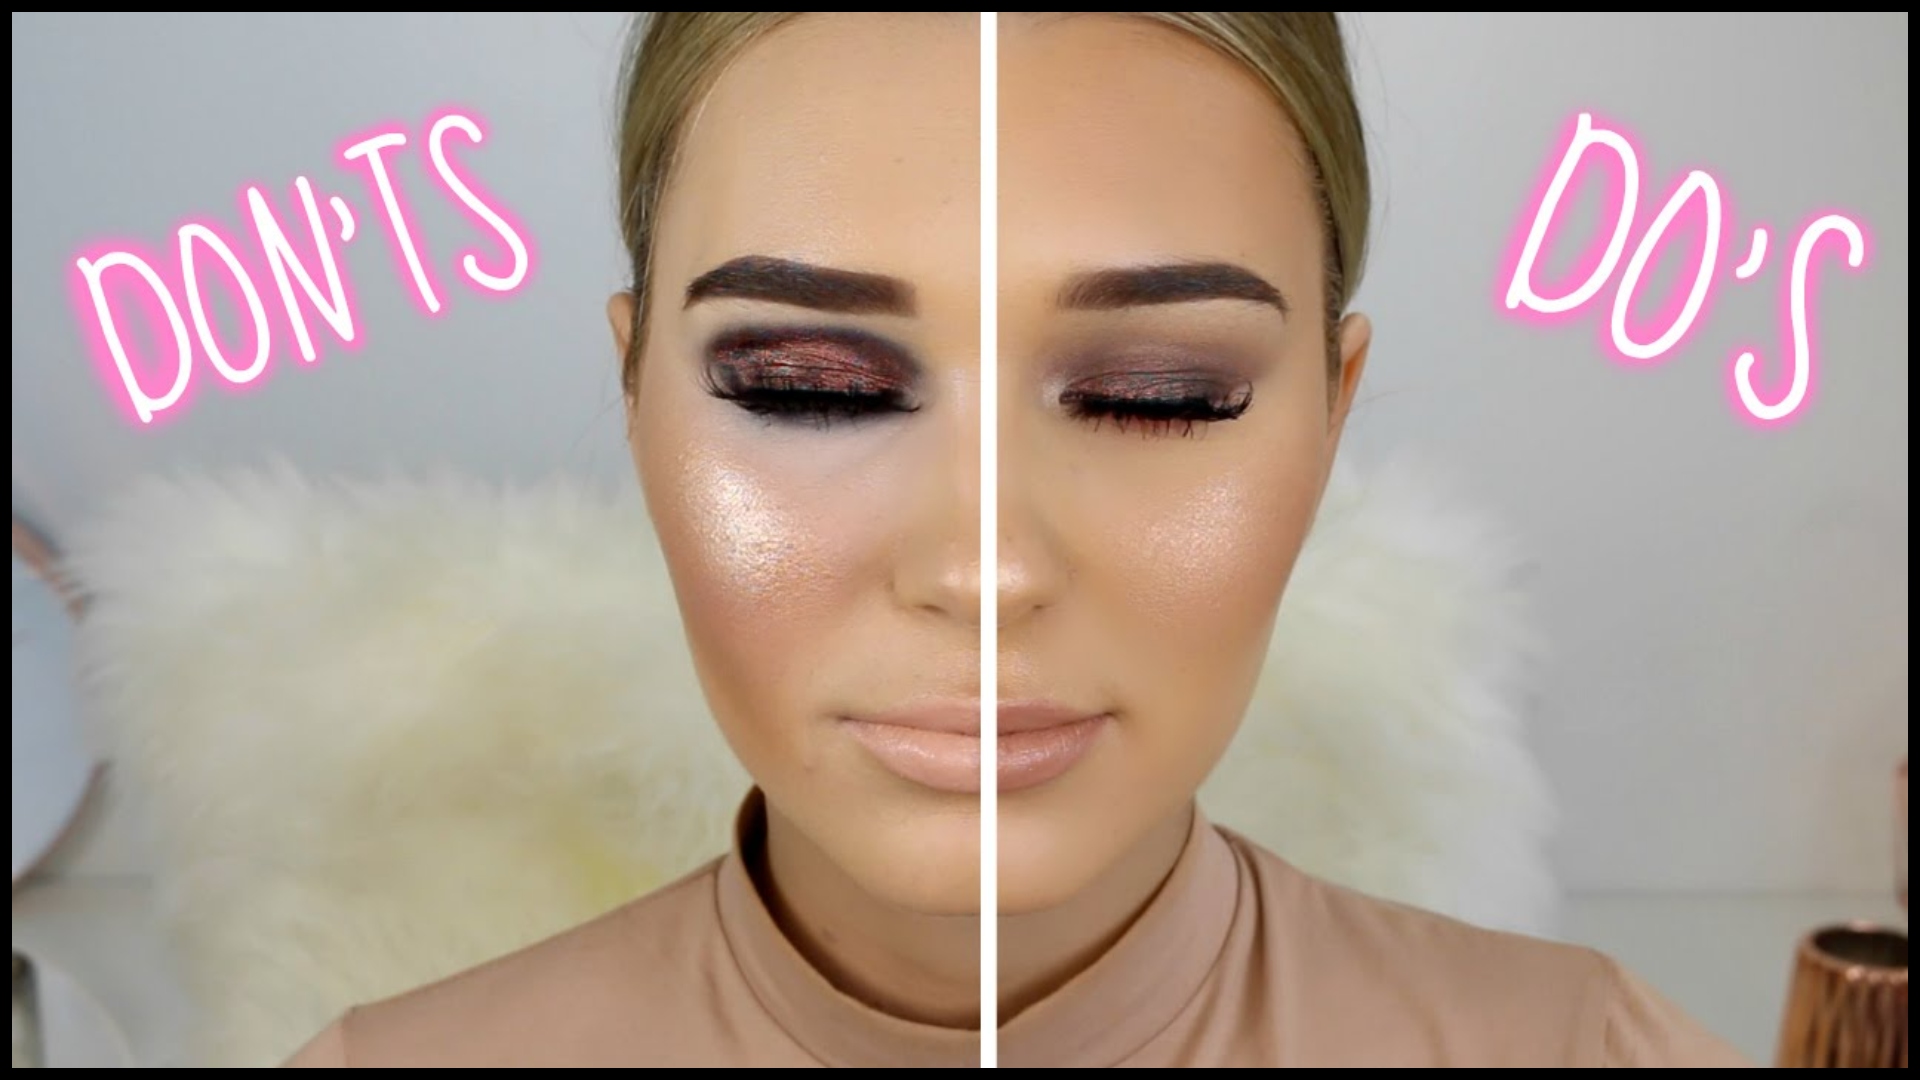 Latest Makeup Tips & Tricks - Trending Make Up Ideas & Products updates